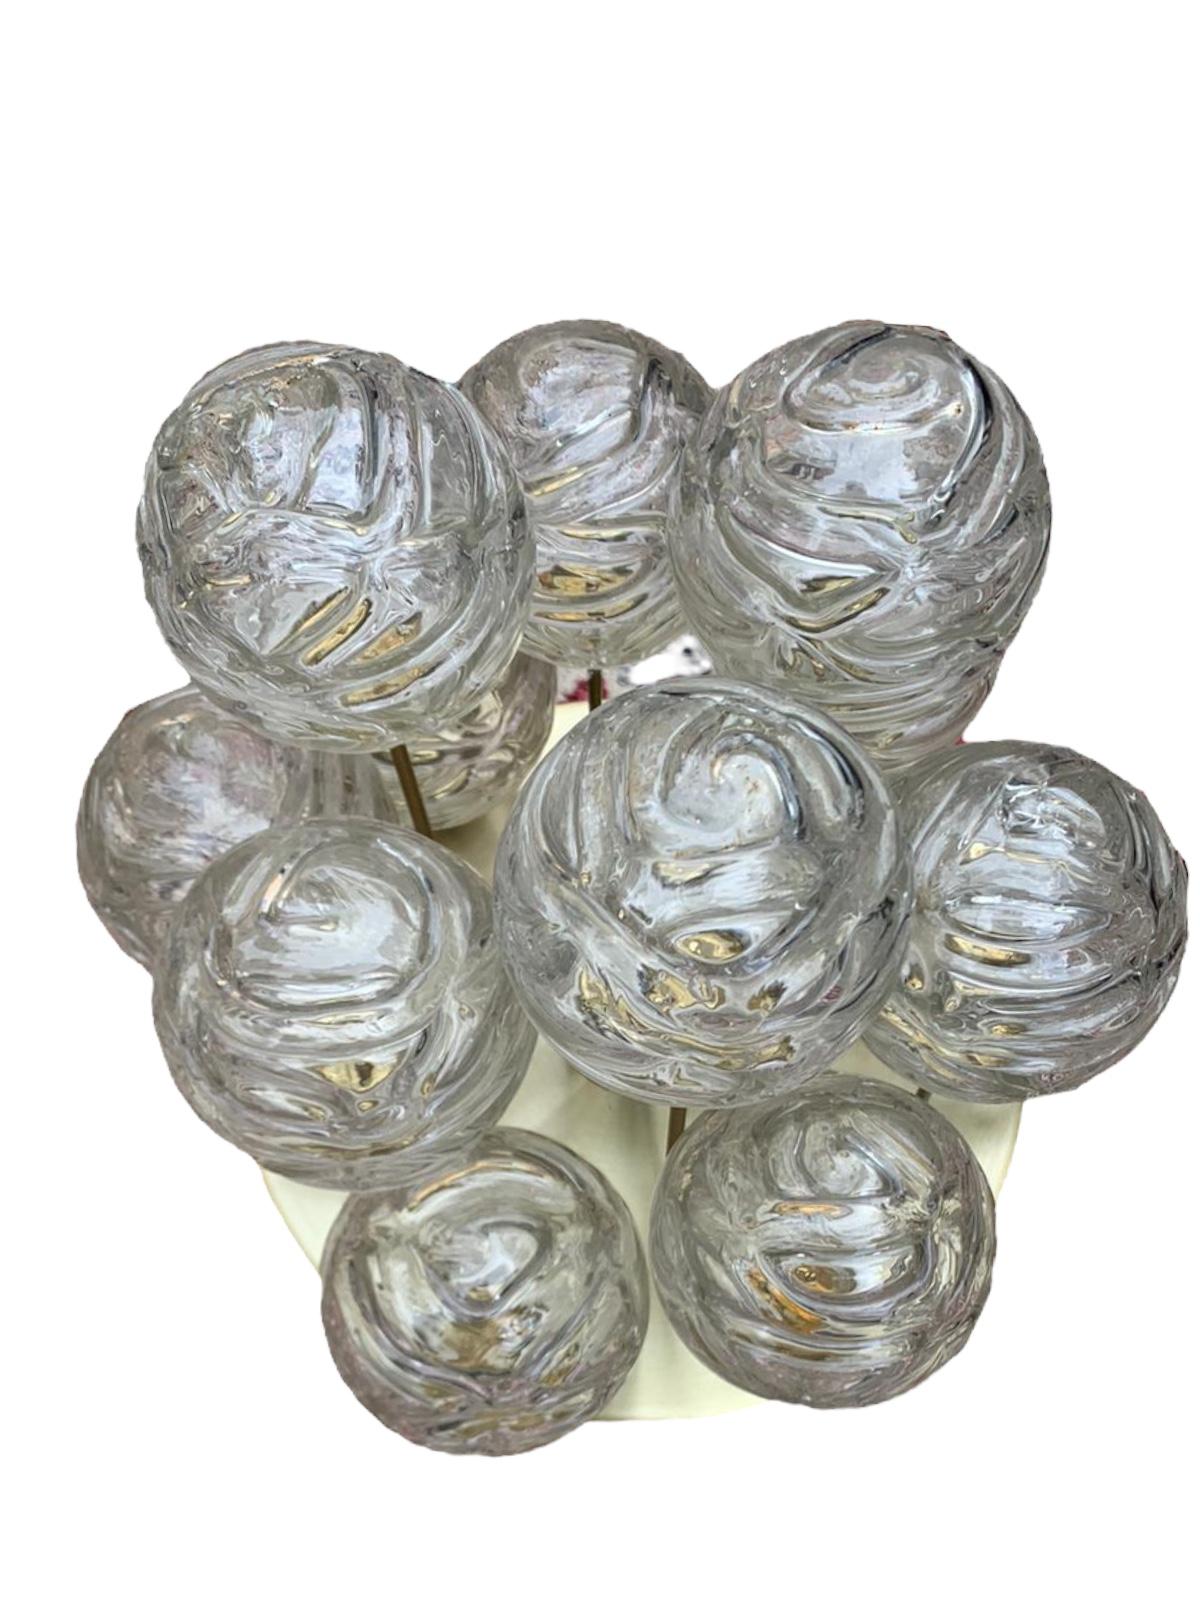 Mid-20th Century Swirled Glass Ball Flush Mount Fixture by Doria Leuchten, Germany, 1960s For Sale